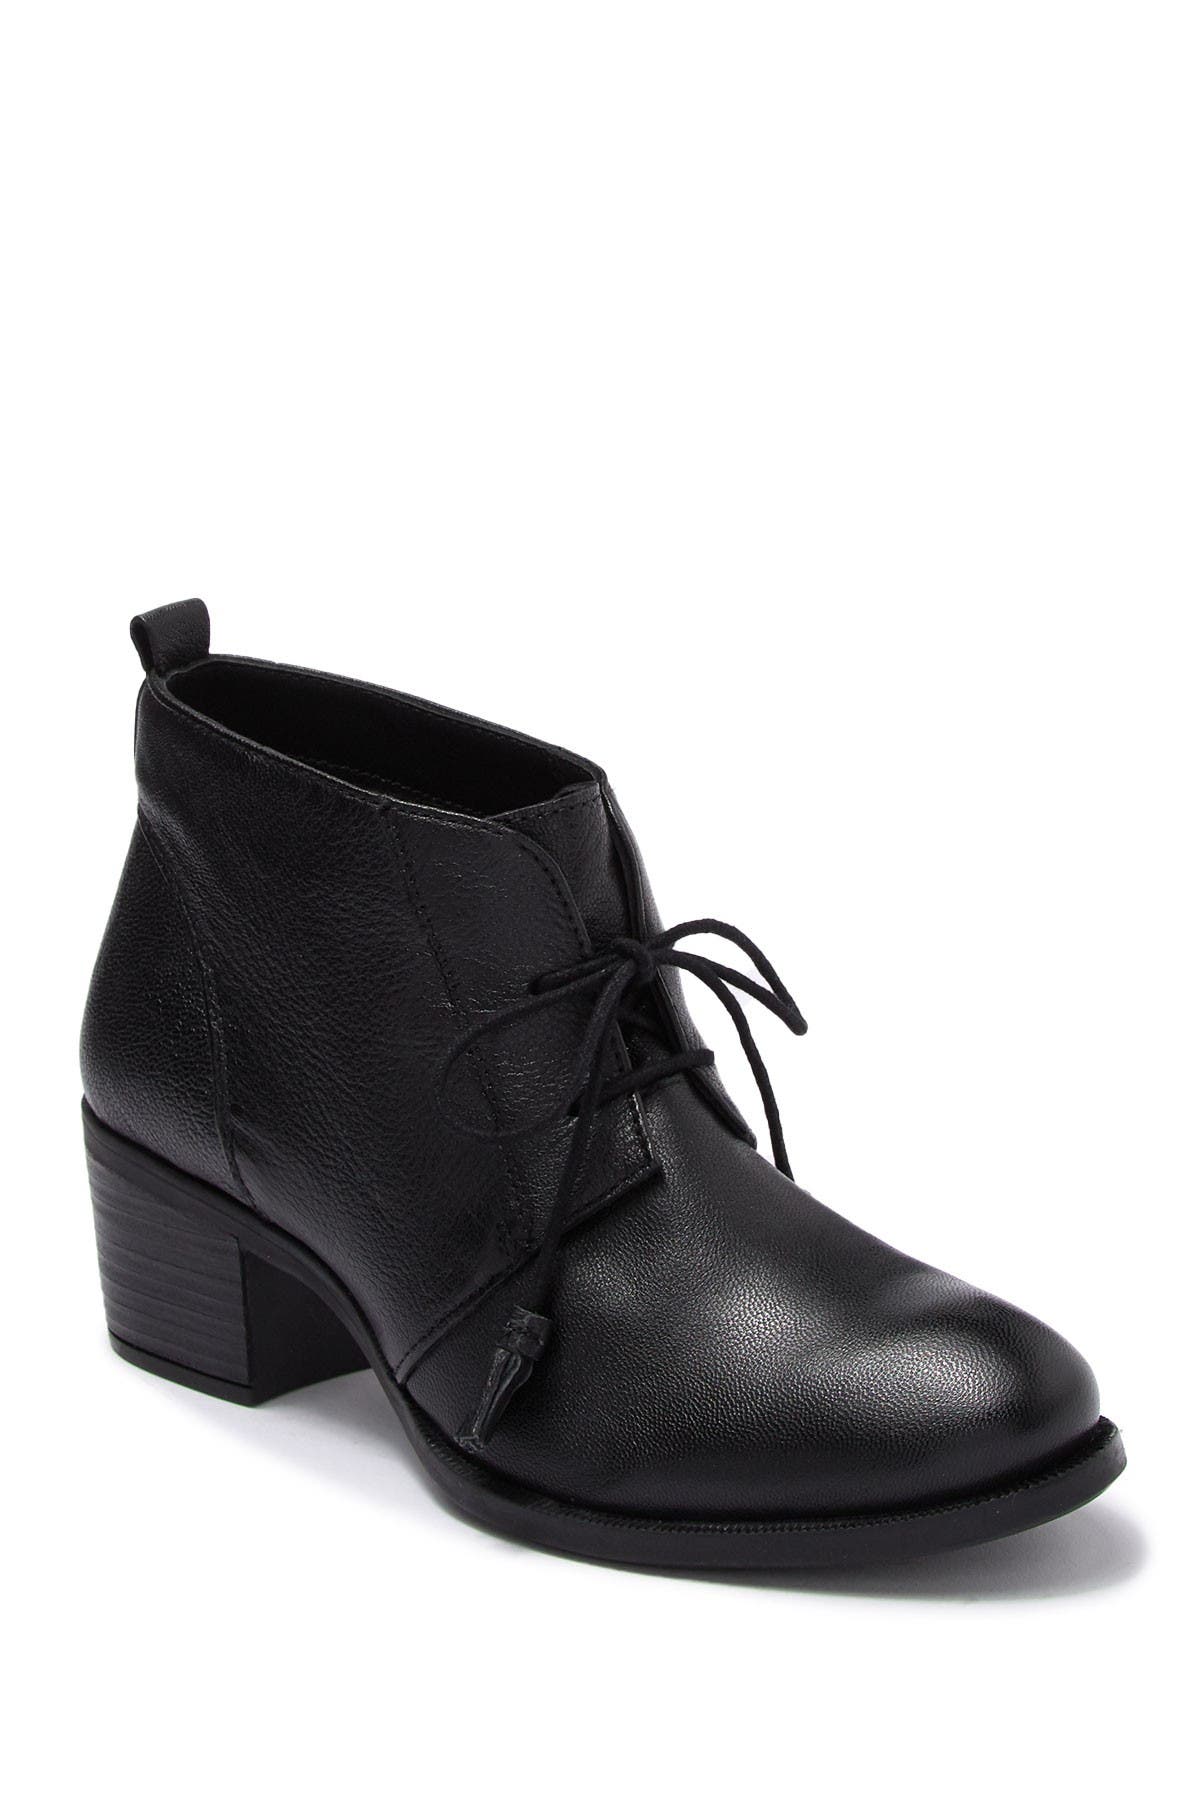 Hush Puppies | Nancy Lace-Up Leather 